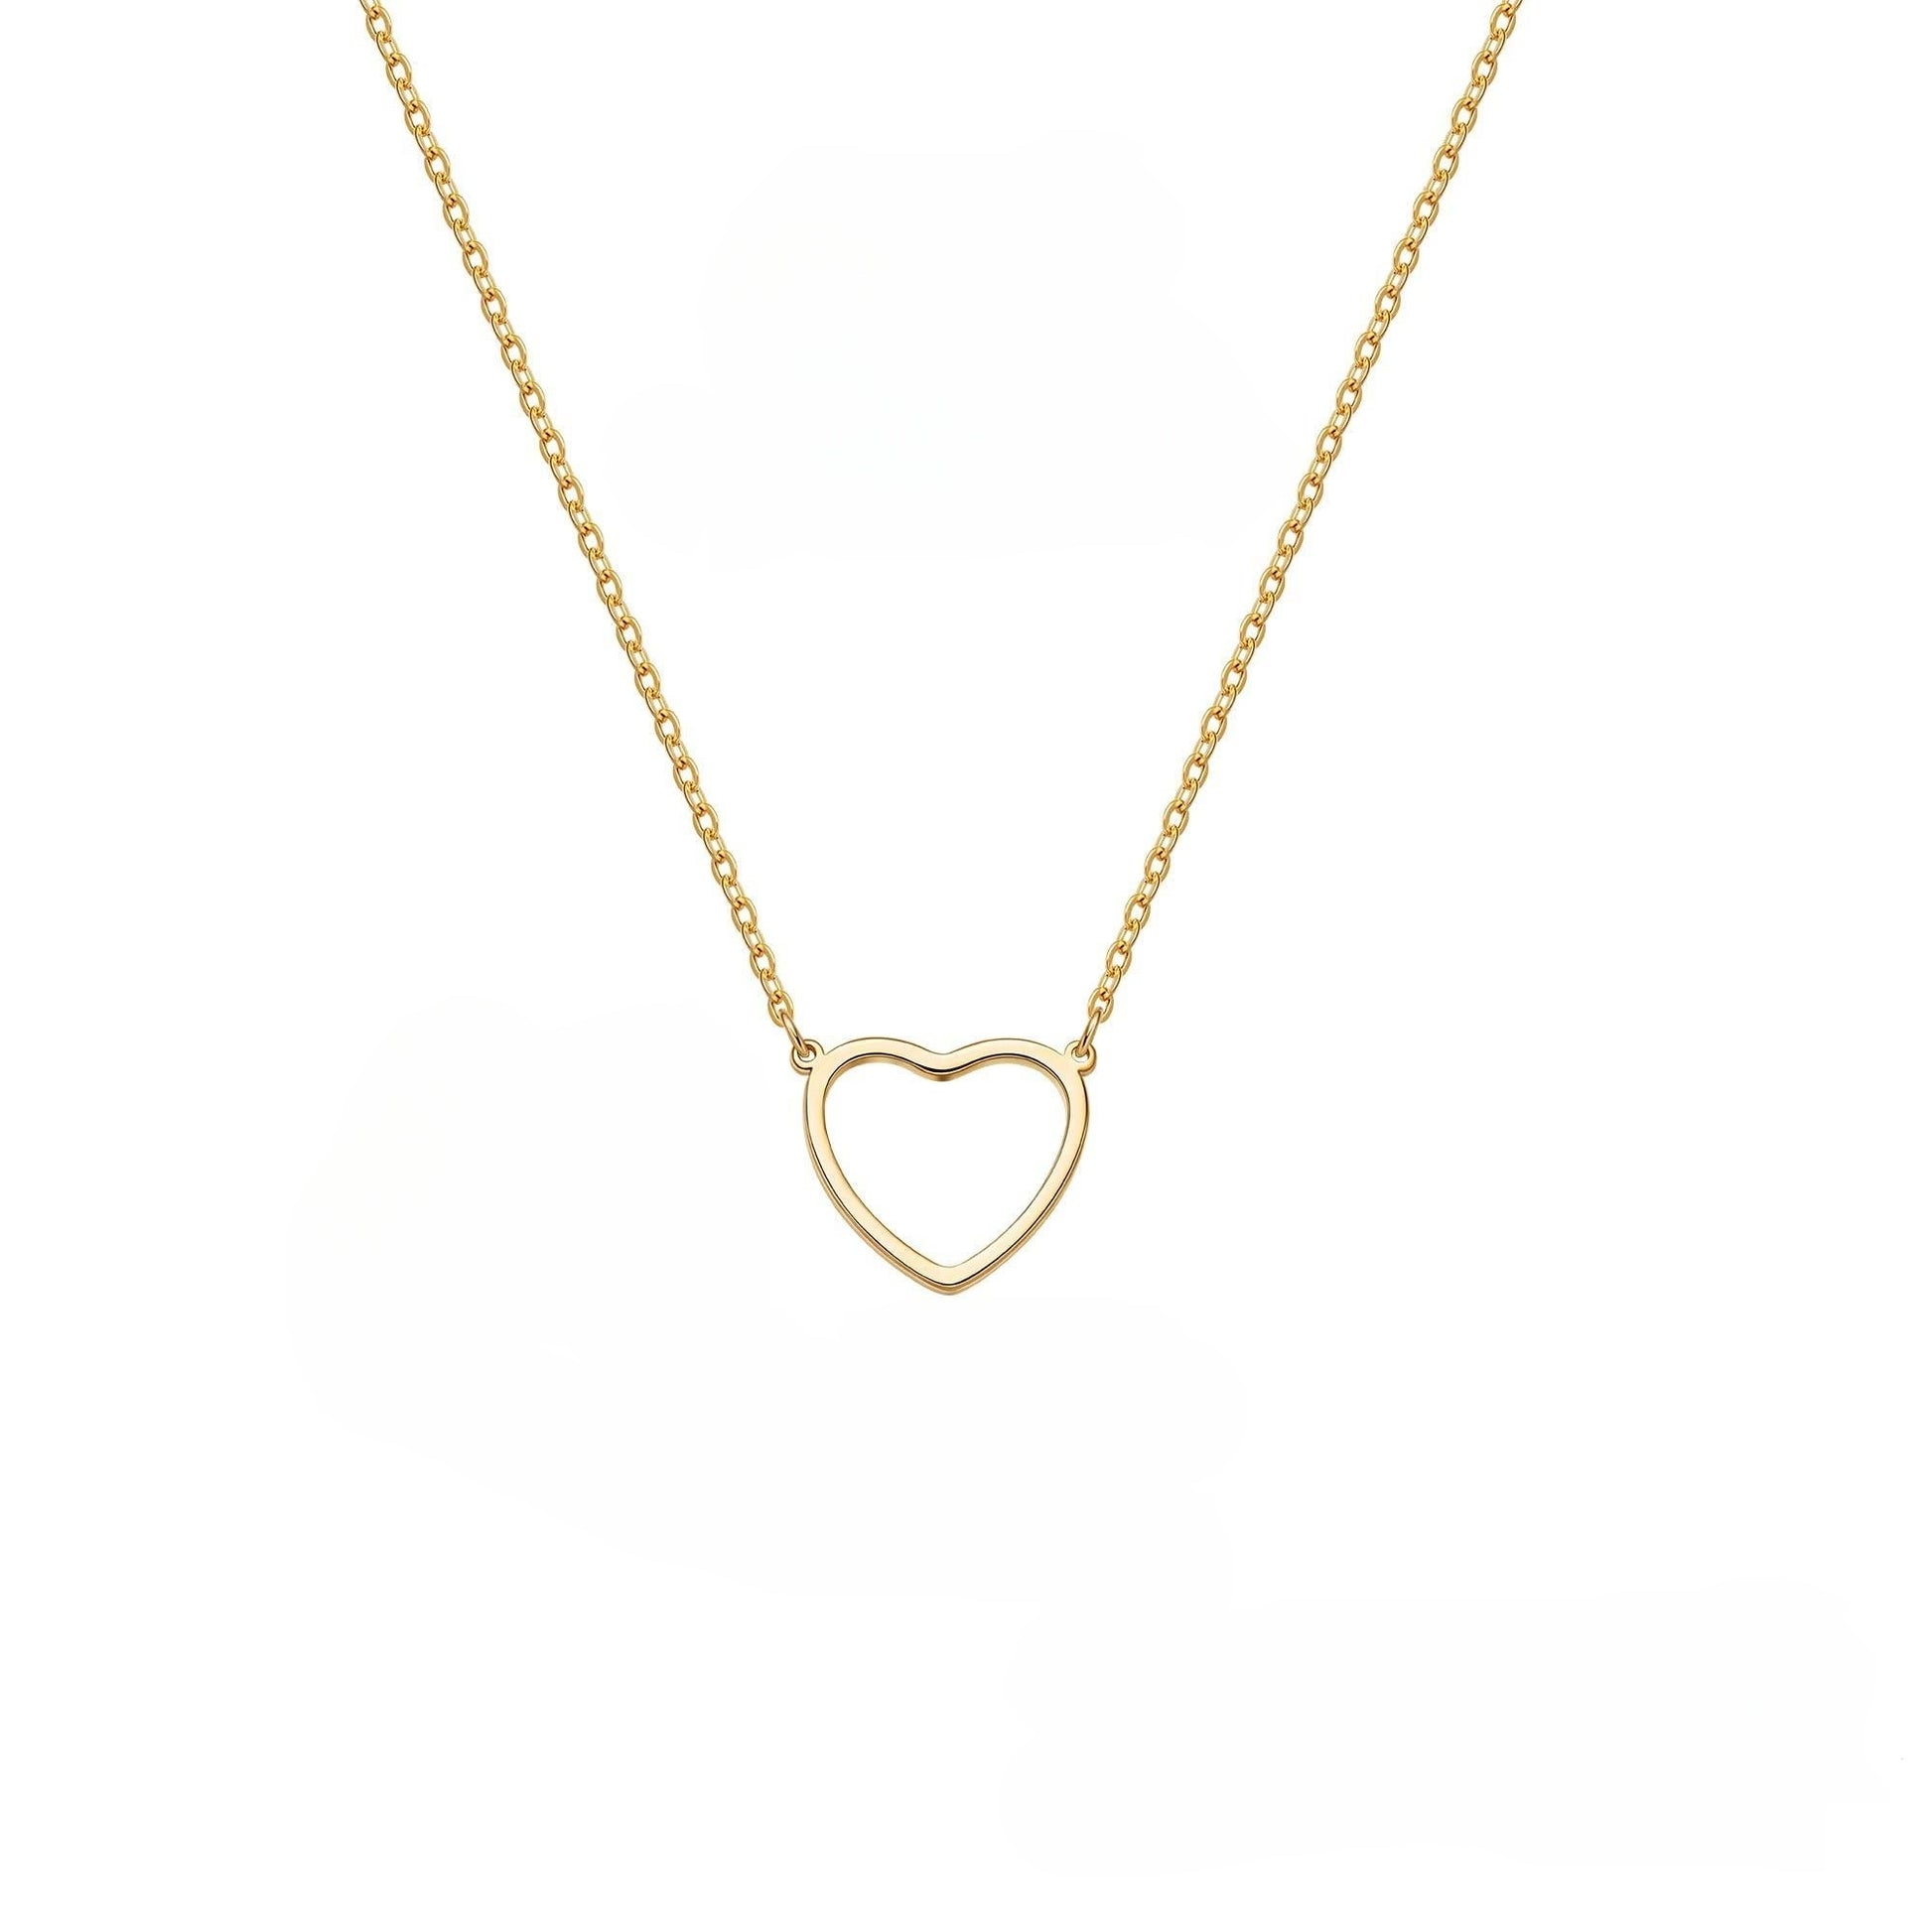 LEXODY Dainty Heart Necklace Tiny Heart Pendant Choker Necklaces Small 14k  Gold Plated Cute Open Heart Chain Necklace for Women Minimalist Jewelry